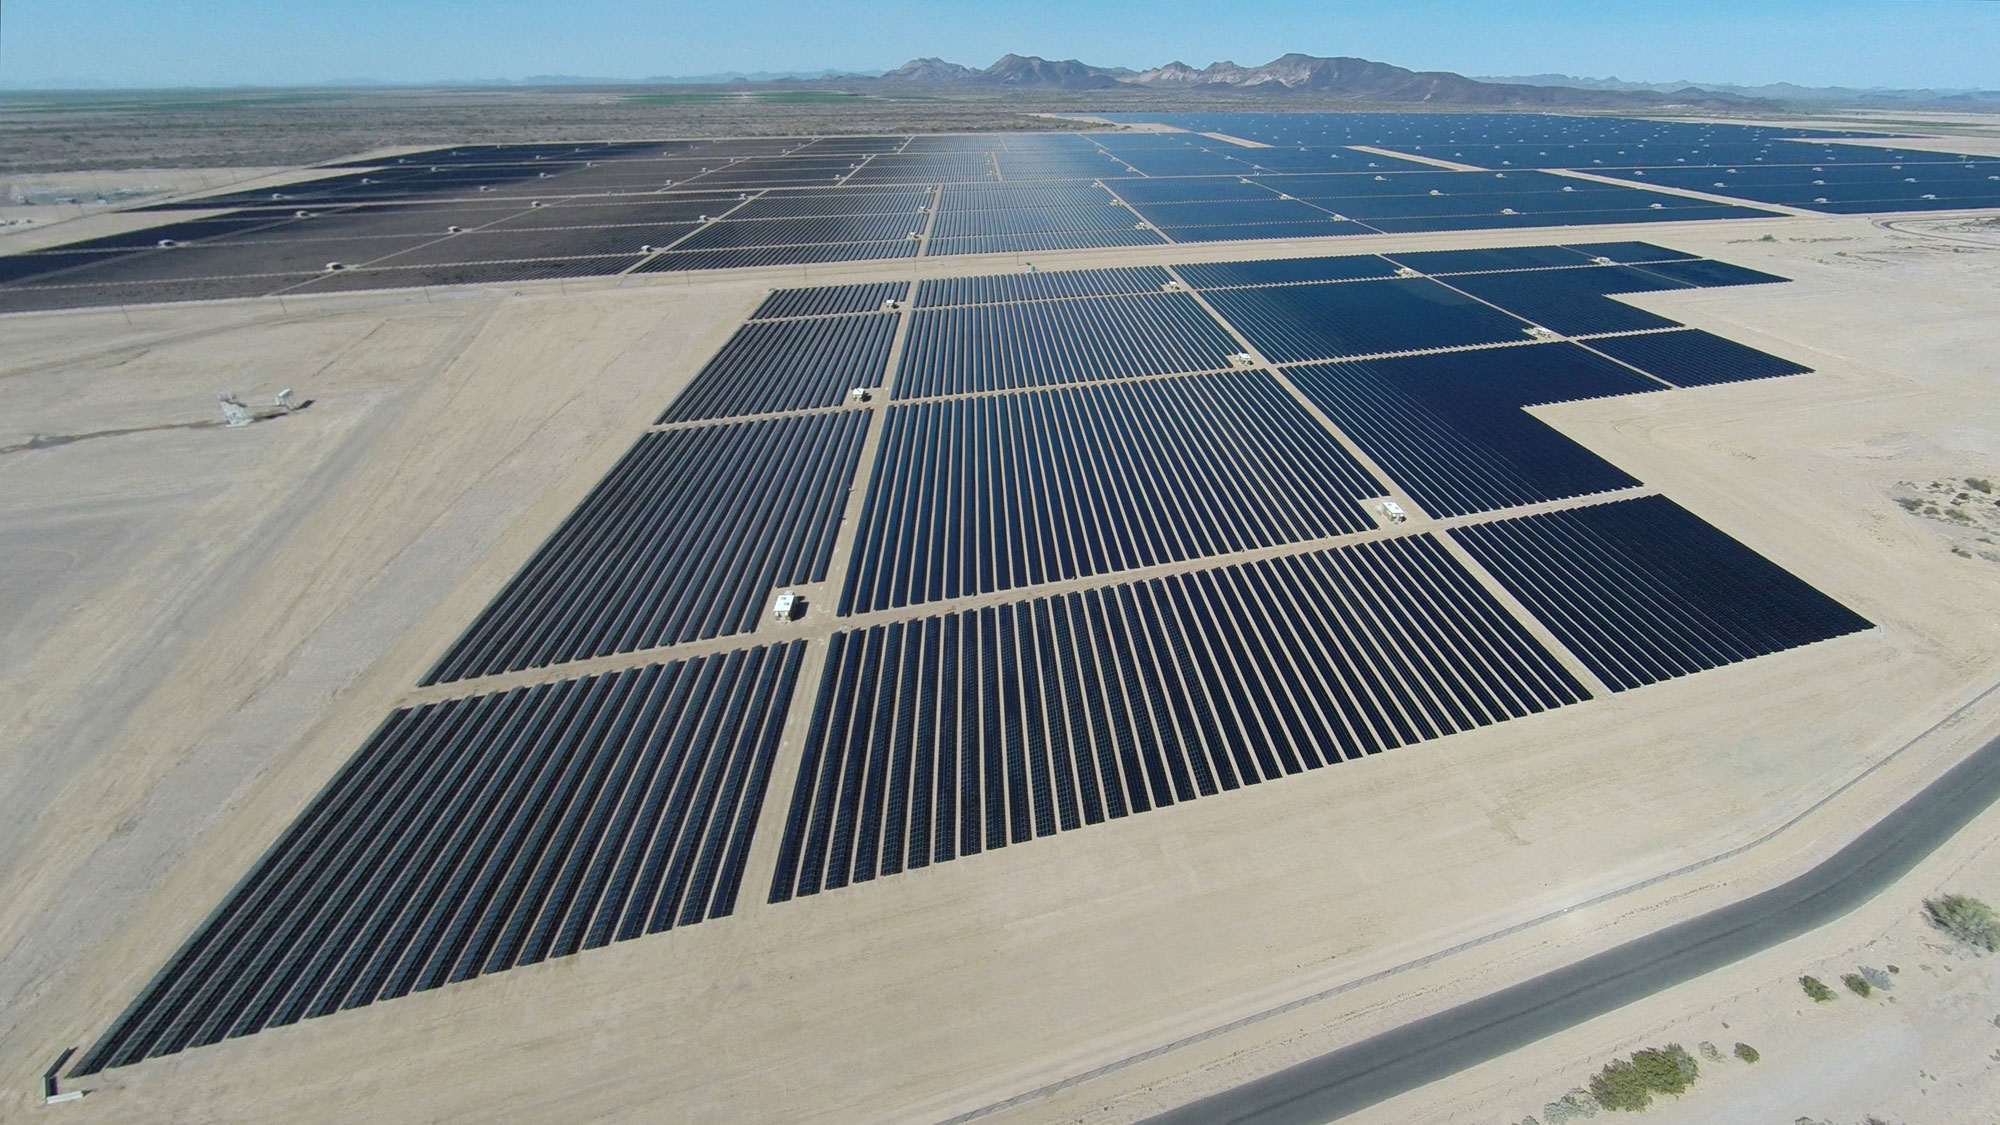 Photo of the Agua Caliente solar farm, Arizona. Photo shows arrays of solar panels arranged in multiple grids on a flat, barren landscape. Mountains can be seen on the horizon.